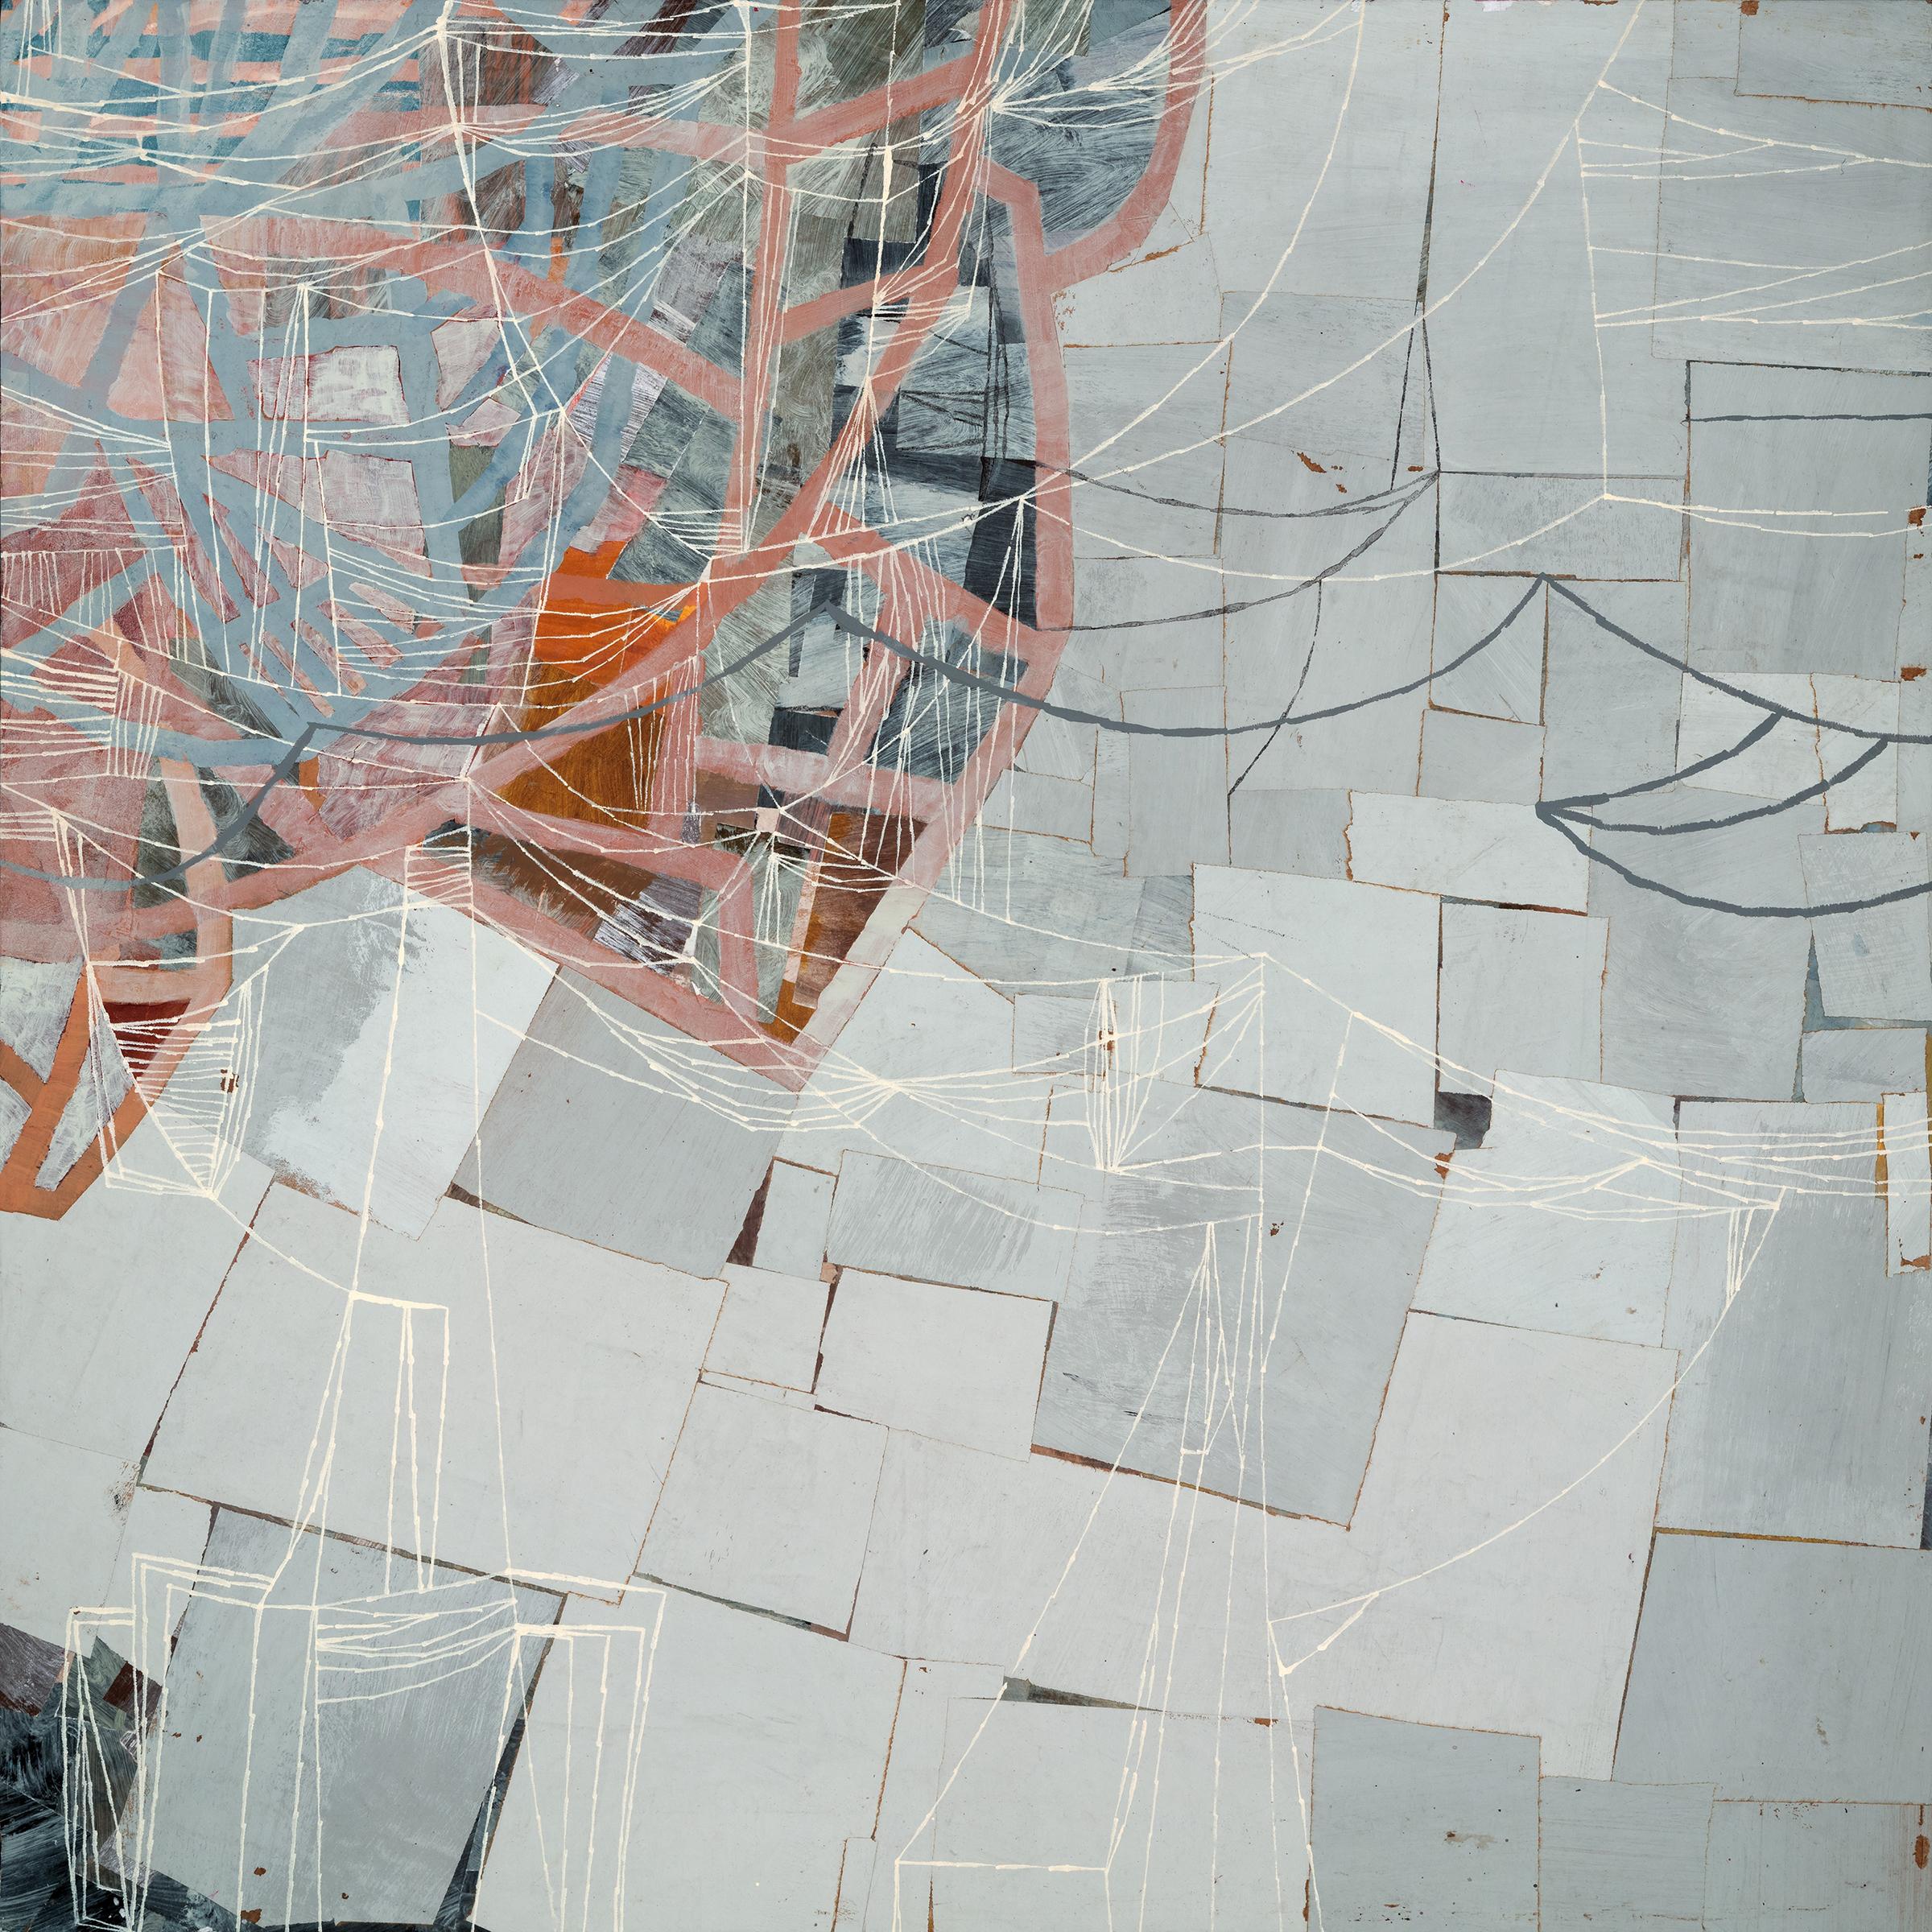 Aimée Farnet Siegel Abstract Painting - "Netting The Knot" - Non-Objective Paper Collage - Abstract - Diebenkorn